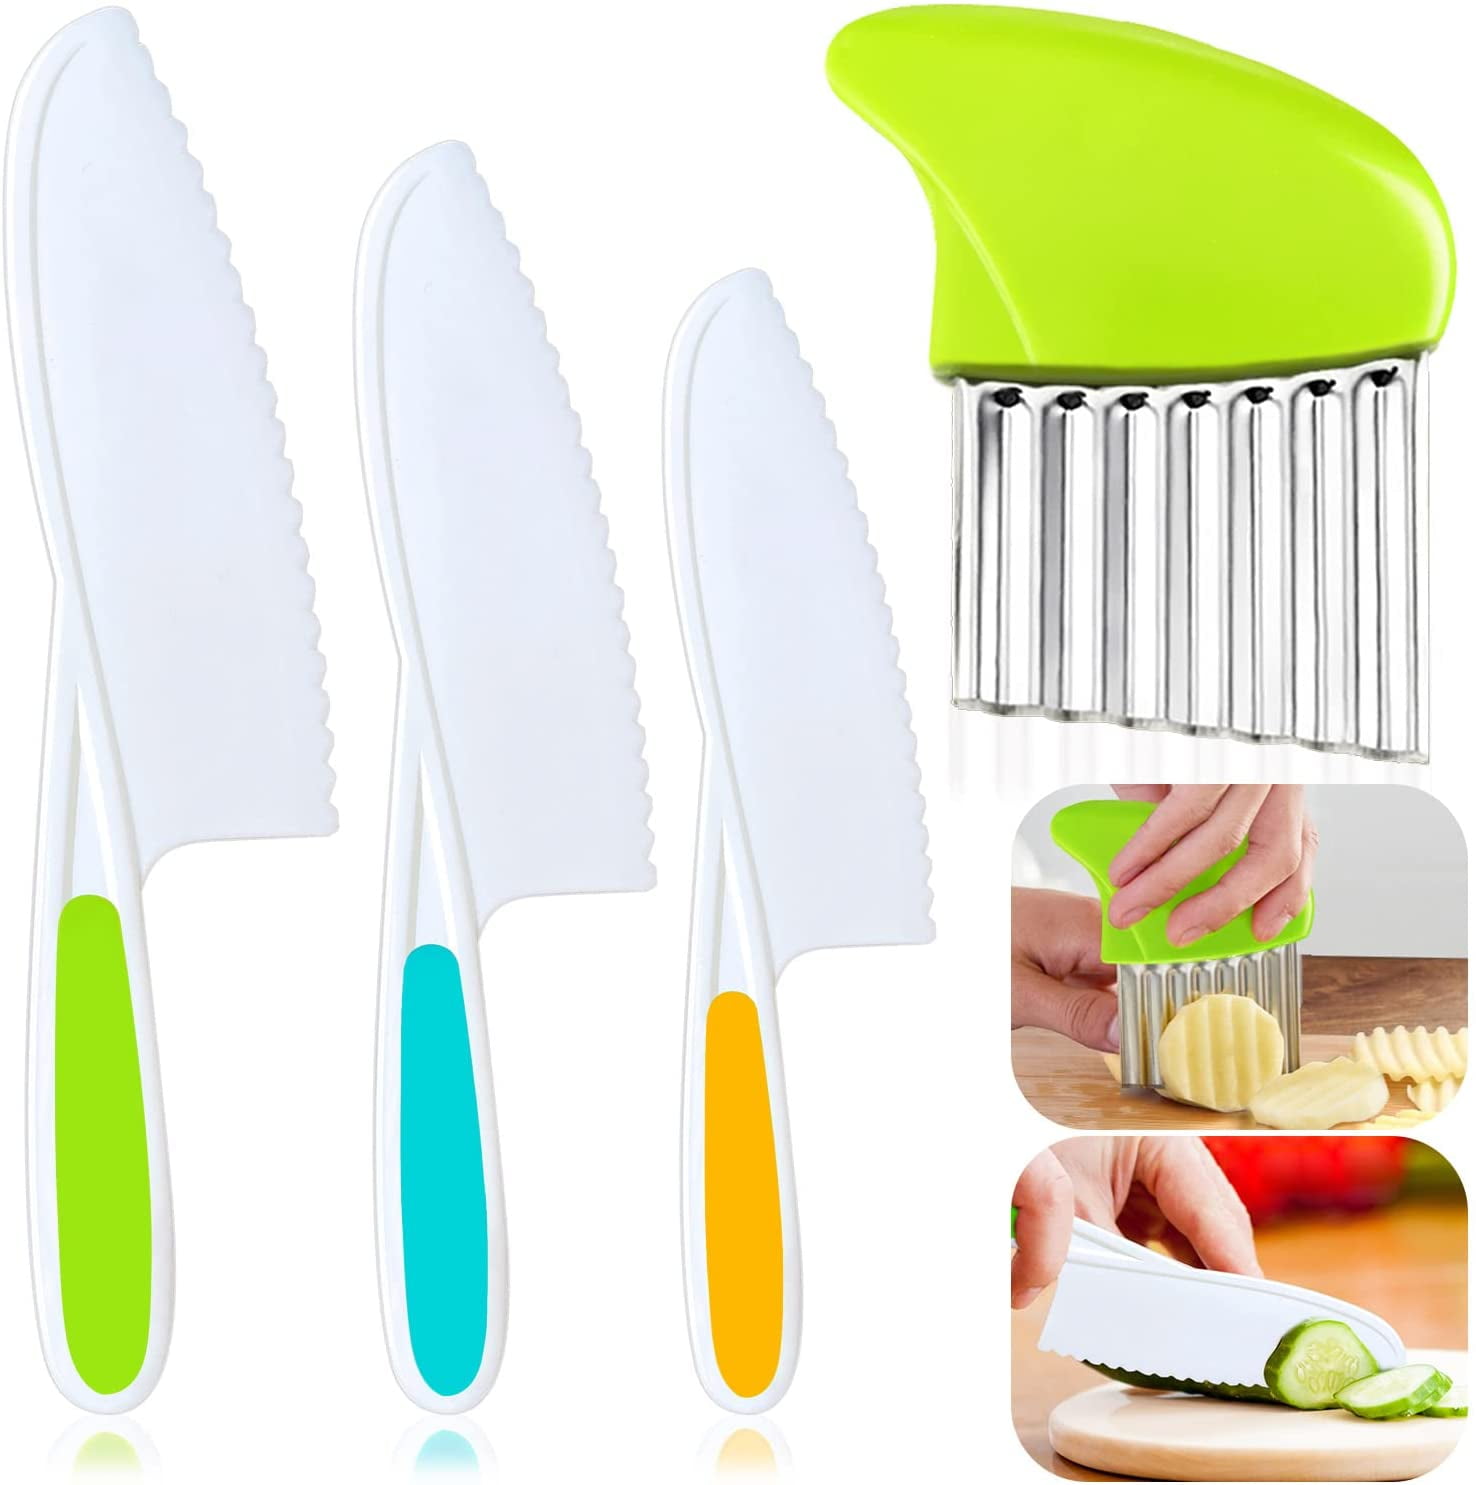 15 PCS Montessori Kitchen Tools for Toddlers Kids Cooking Sets, Apron,  Serrated Toddler Knife, Crinkle Cutter, Sandwich Cutter, Wooden Fruit  Knife, Y